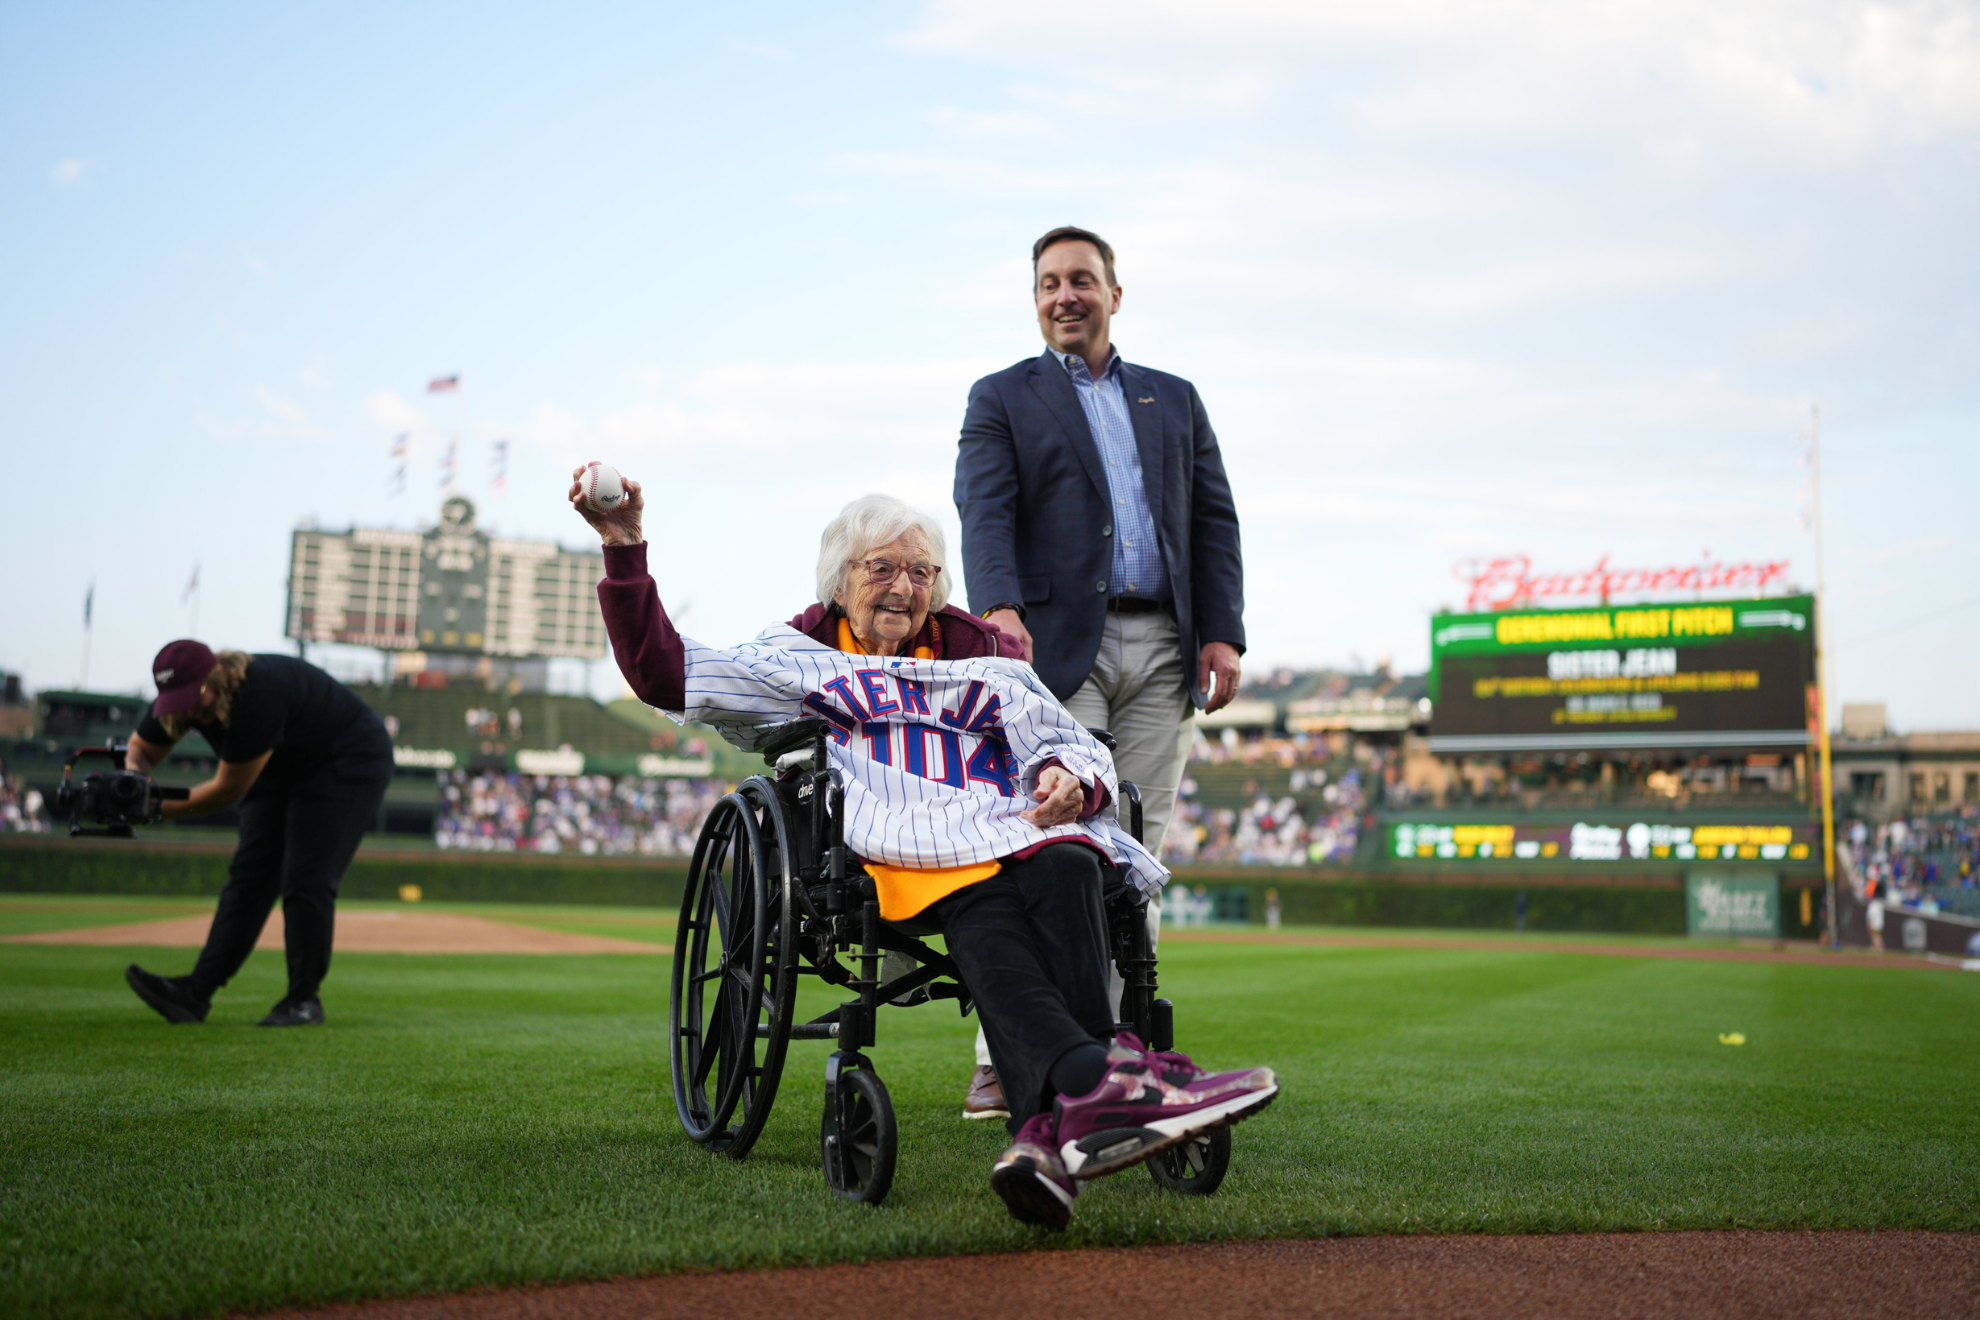 Sister Jean throws out the first pitch at Wrigley Field.